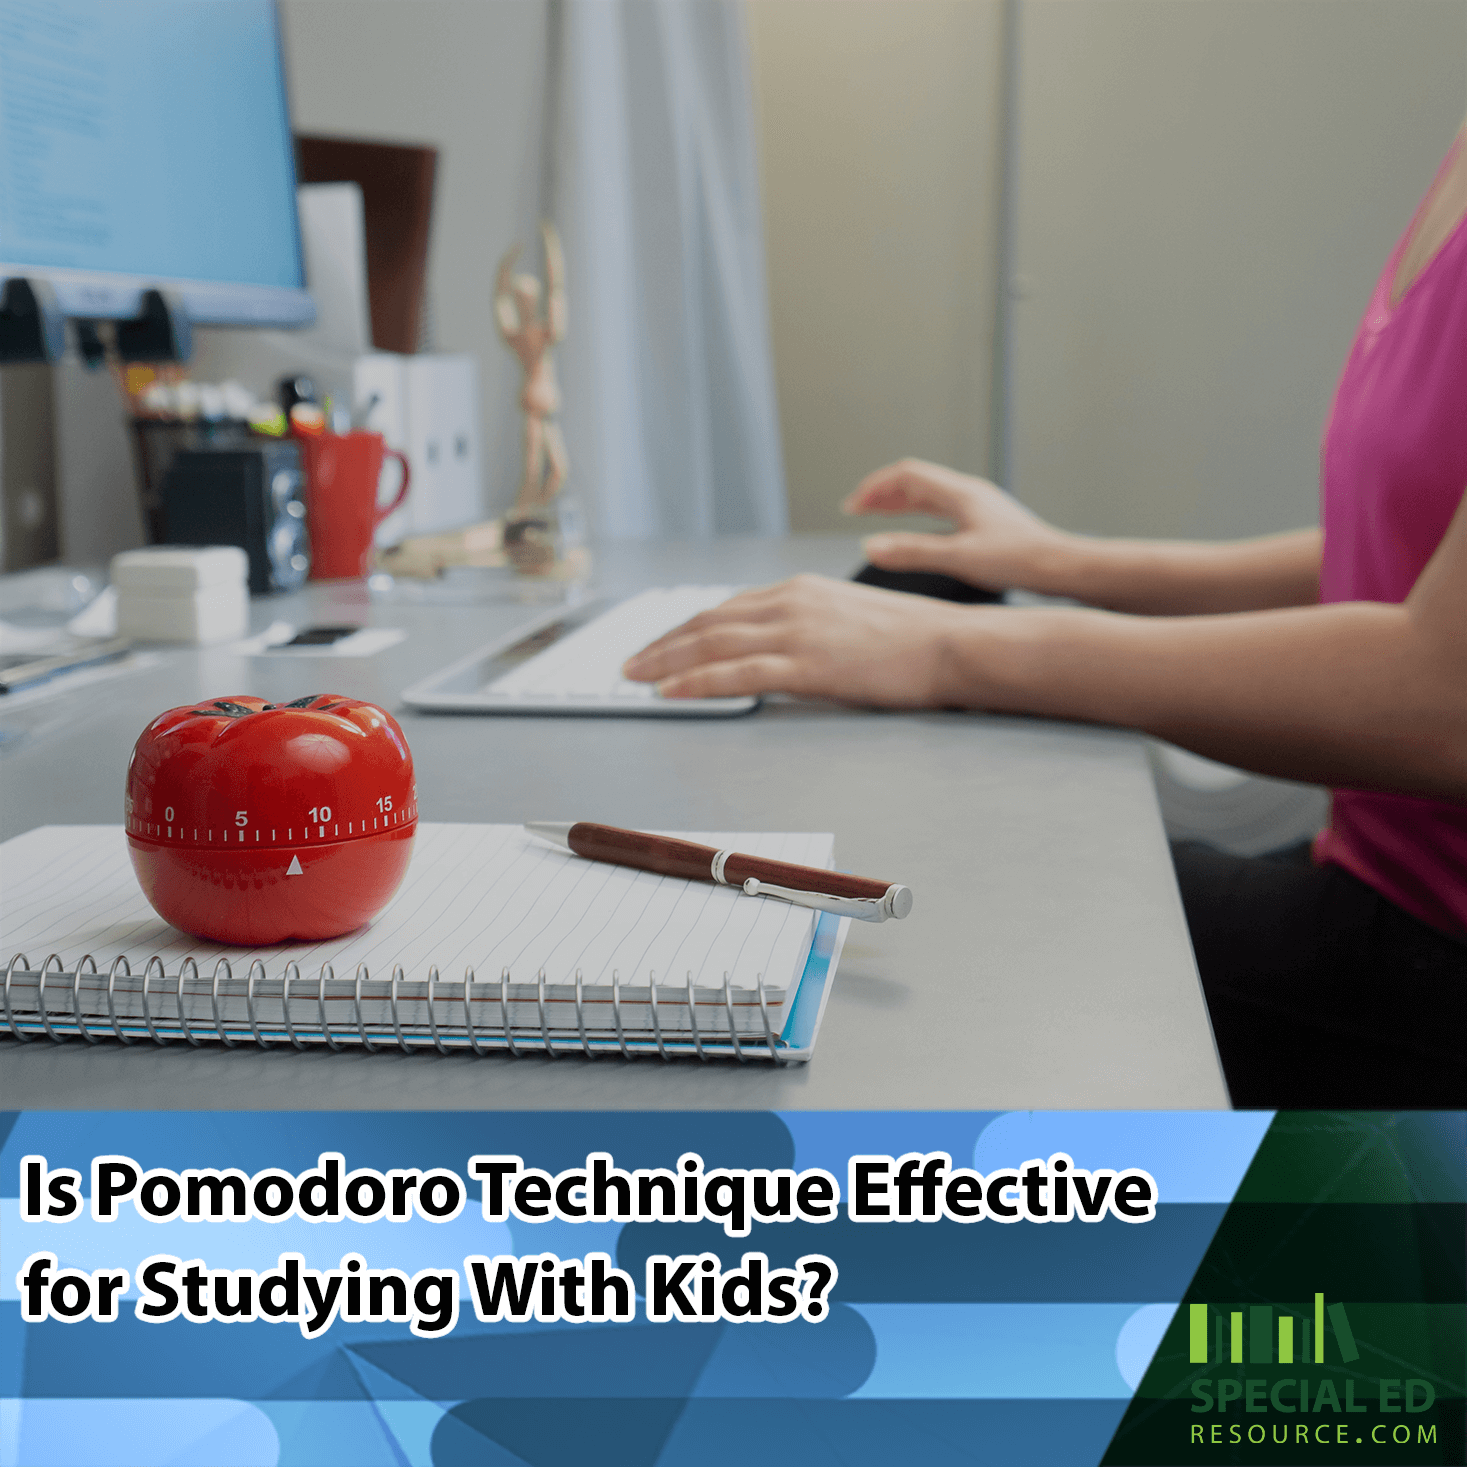 A girl working on a computer with a red tomato-shaped timer, a pen, and a notebook on the desk. The text on the image reads, "Is Pomodoro Technique Effective for Studying With Kids?" with the logo of Special Ed Resource in the bottom right corner.